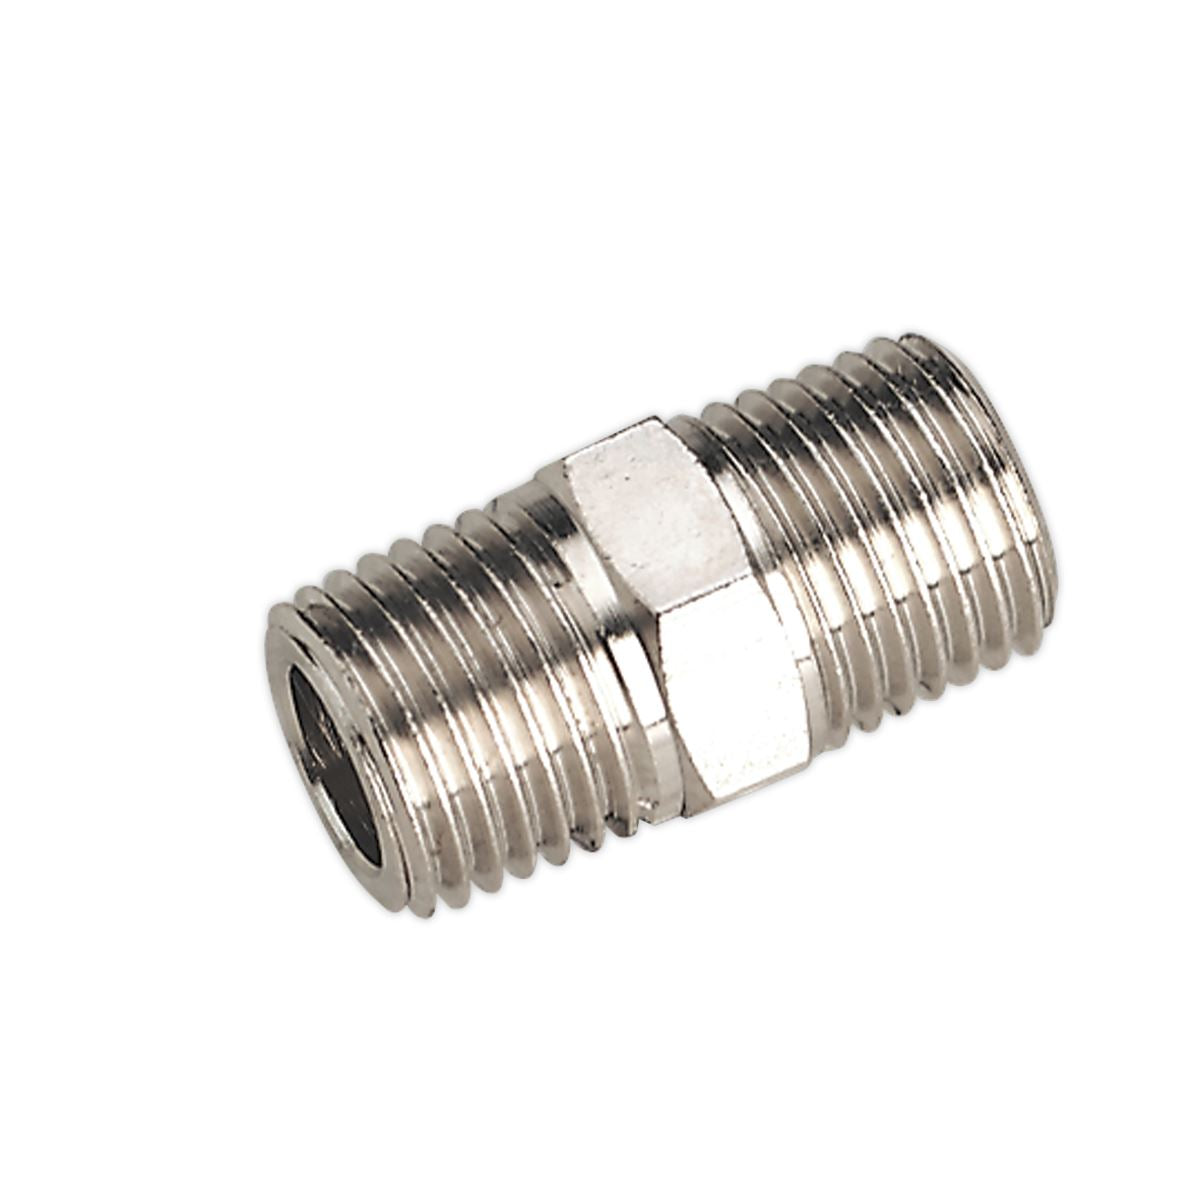 Sealey Double Male Union 1/4"BSPT to 1/4"BSPT